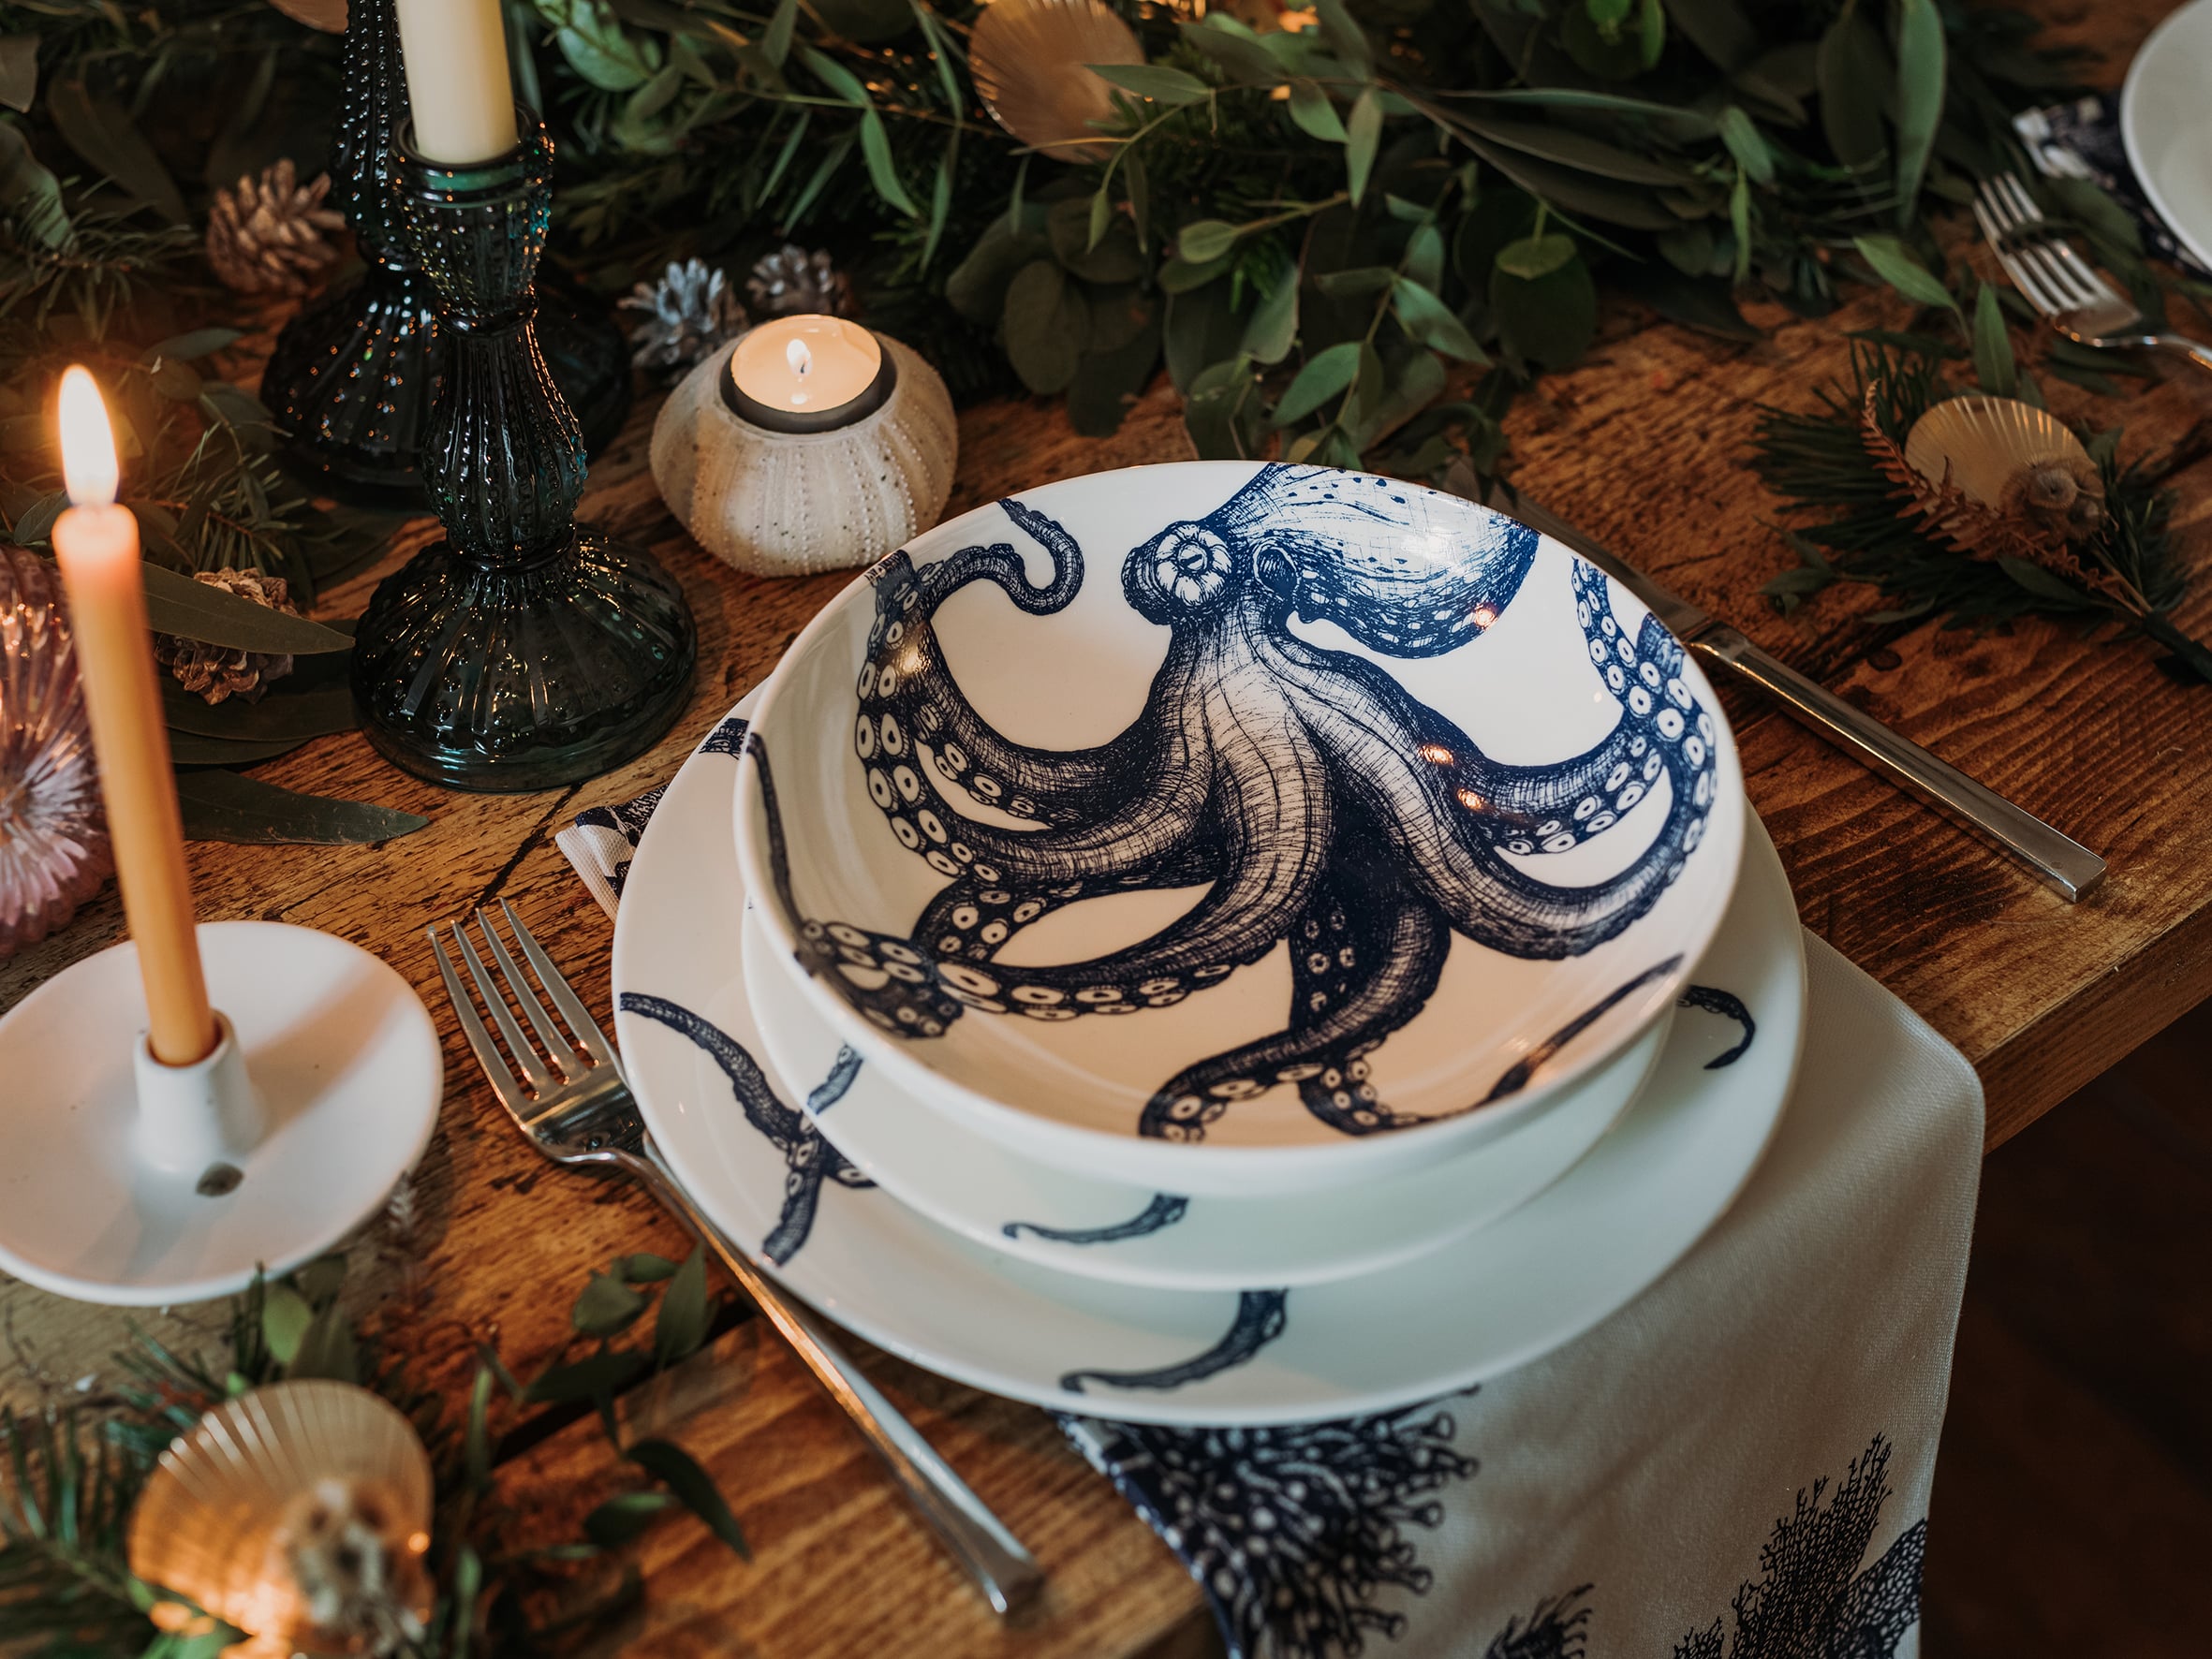 Pasta bowl in Bone China in our Classic range in Navy and white in the Octopus design,placed on a matching dinner plate..All are on a table setting and the table is decorated with foliage and candle holders